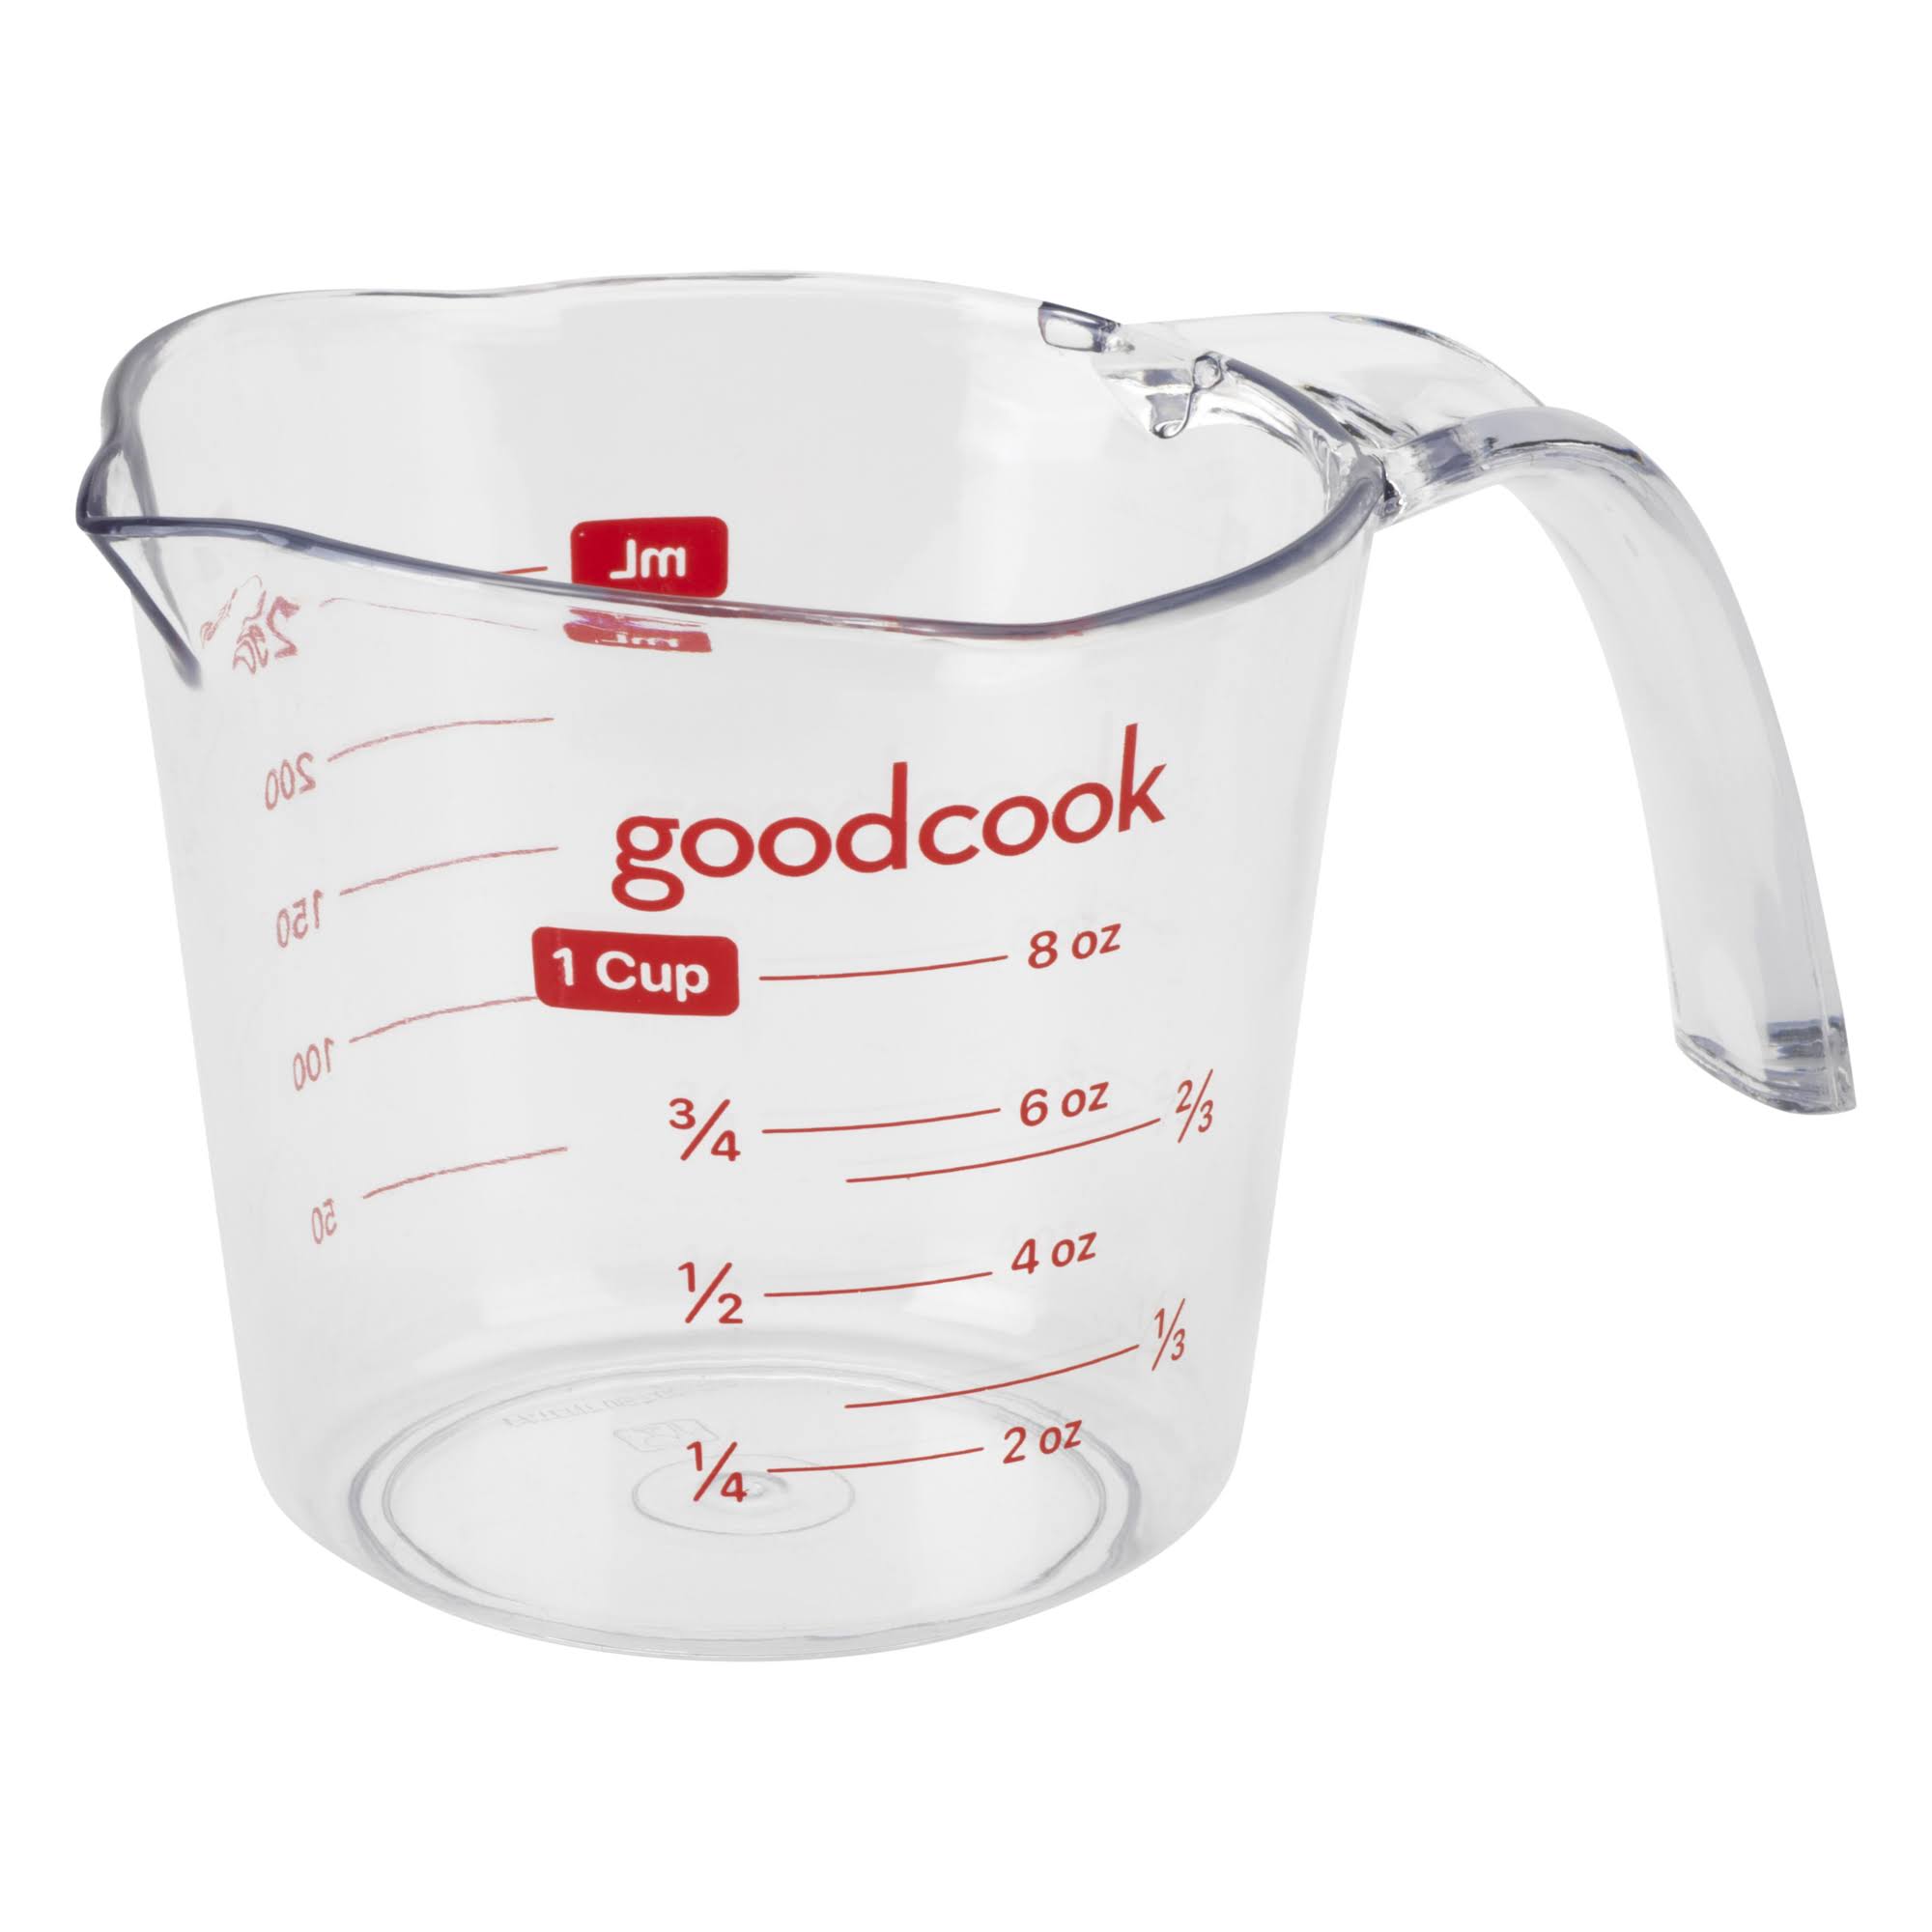 Good Cook Plastic Measuring Cup - 1 Cup